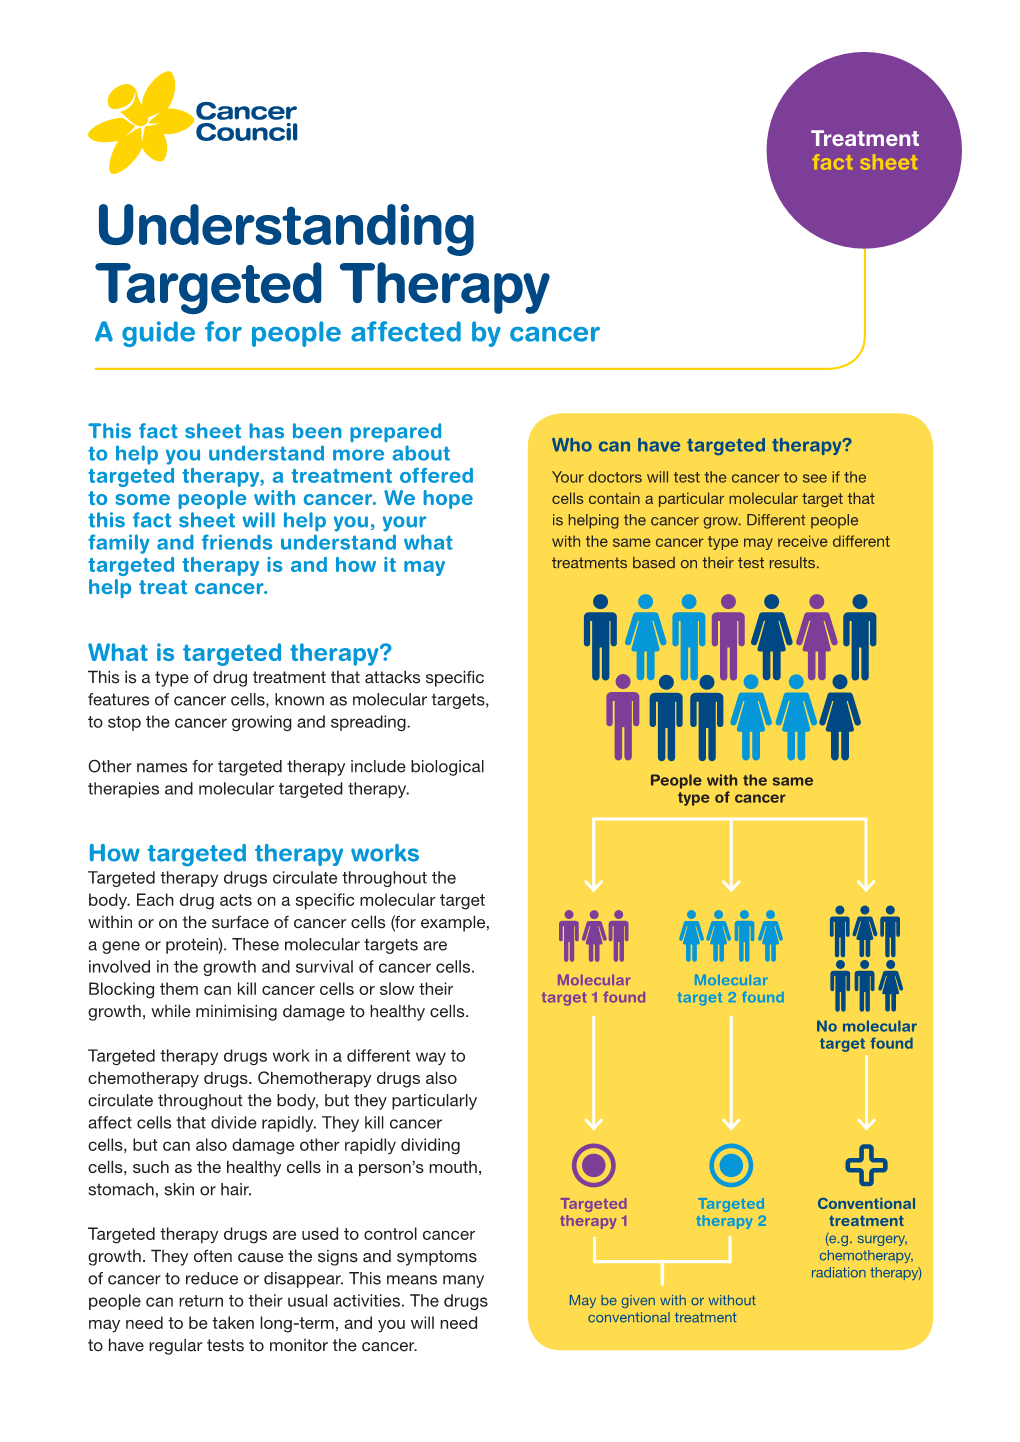 Understanding Targeted Therapy a Guide for People Affected by Cancer